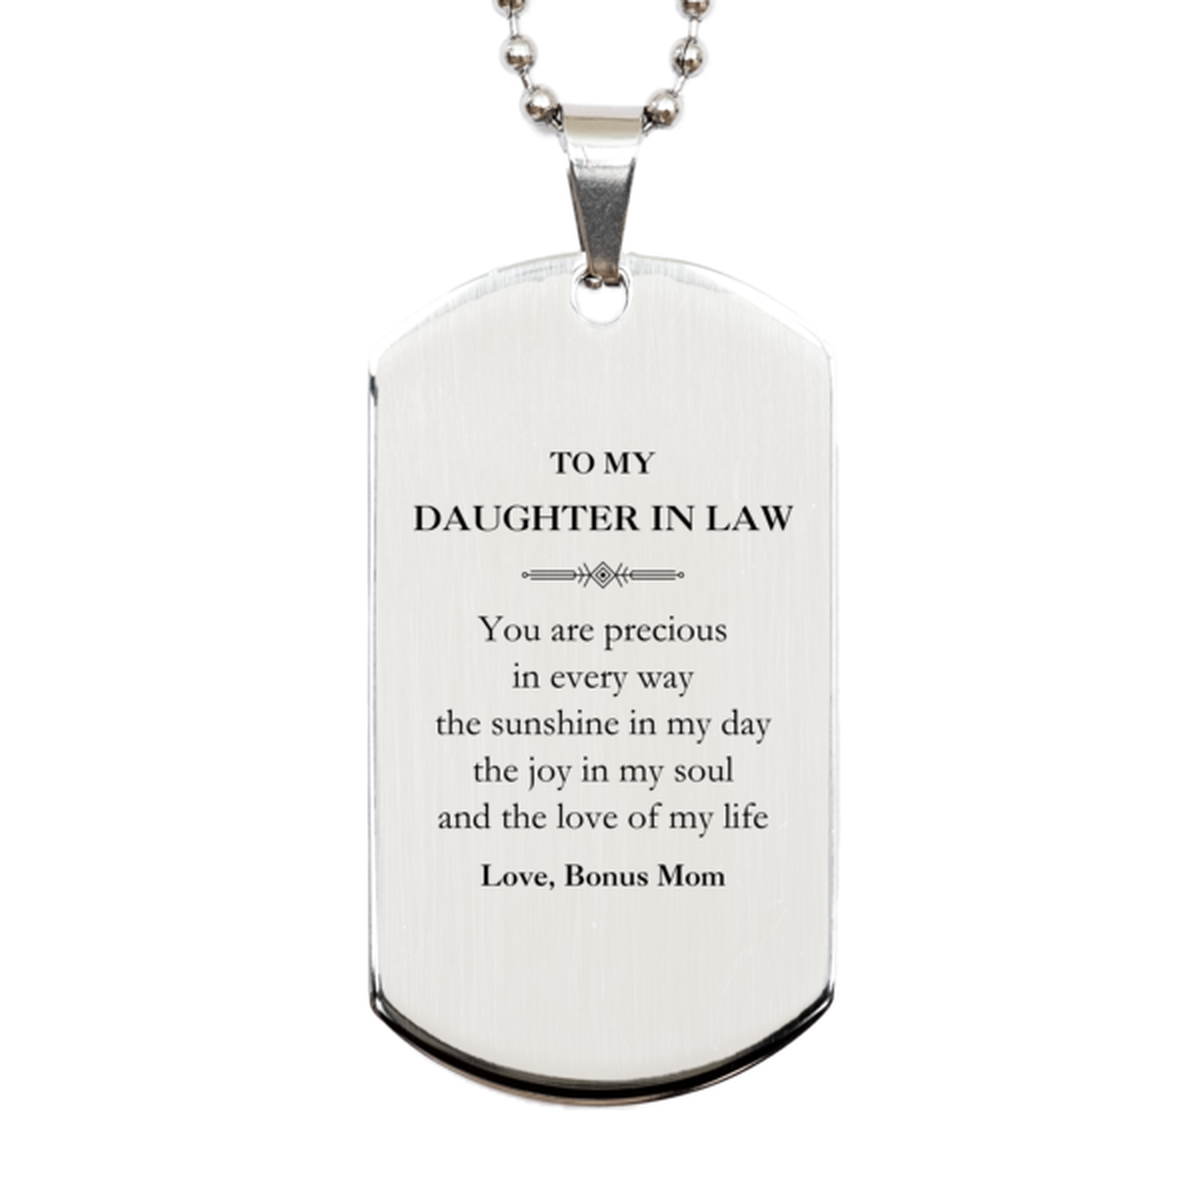 Graduation Gifts for Daughter In Law Silver Dog Tag Present from Bonus Mom, Christmas Daughter In Law Birthday Gifts Daughter In Law You are precious in every way the sunshine in my day. Love, Bonus Mom